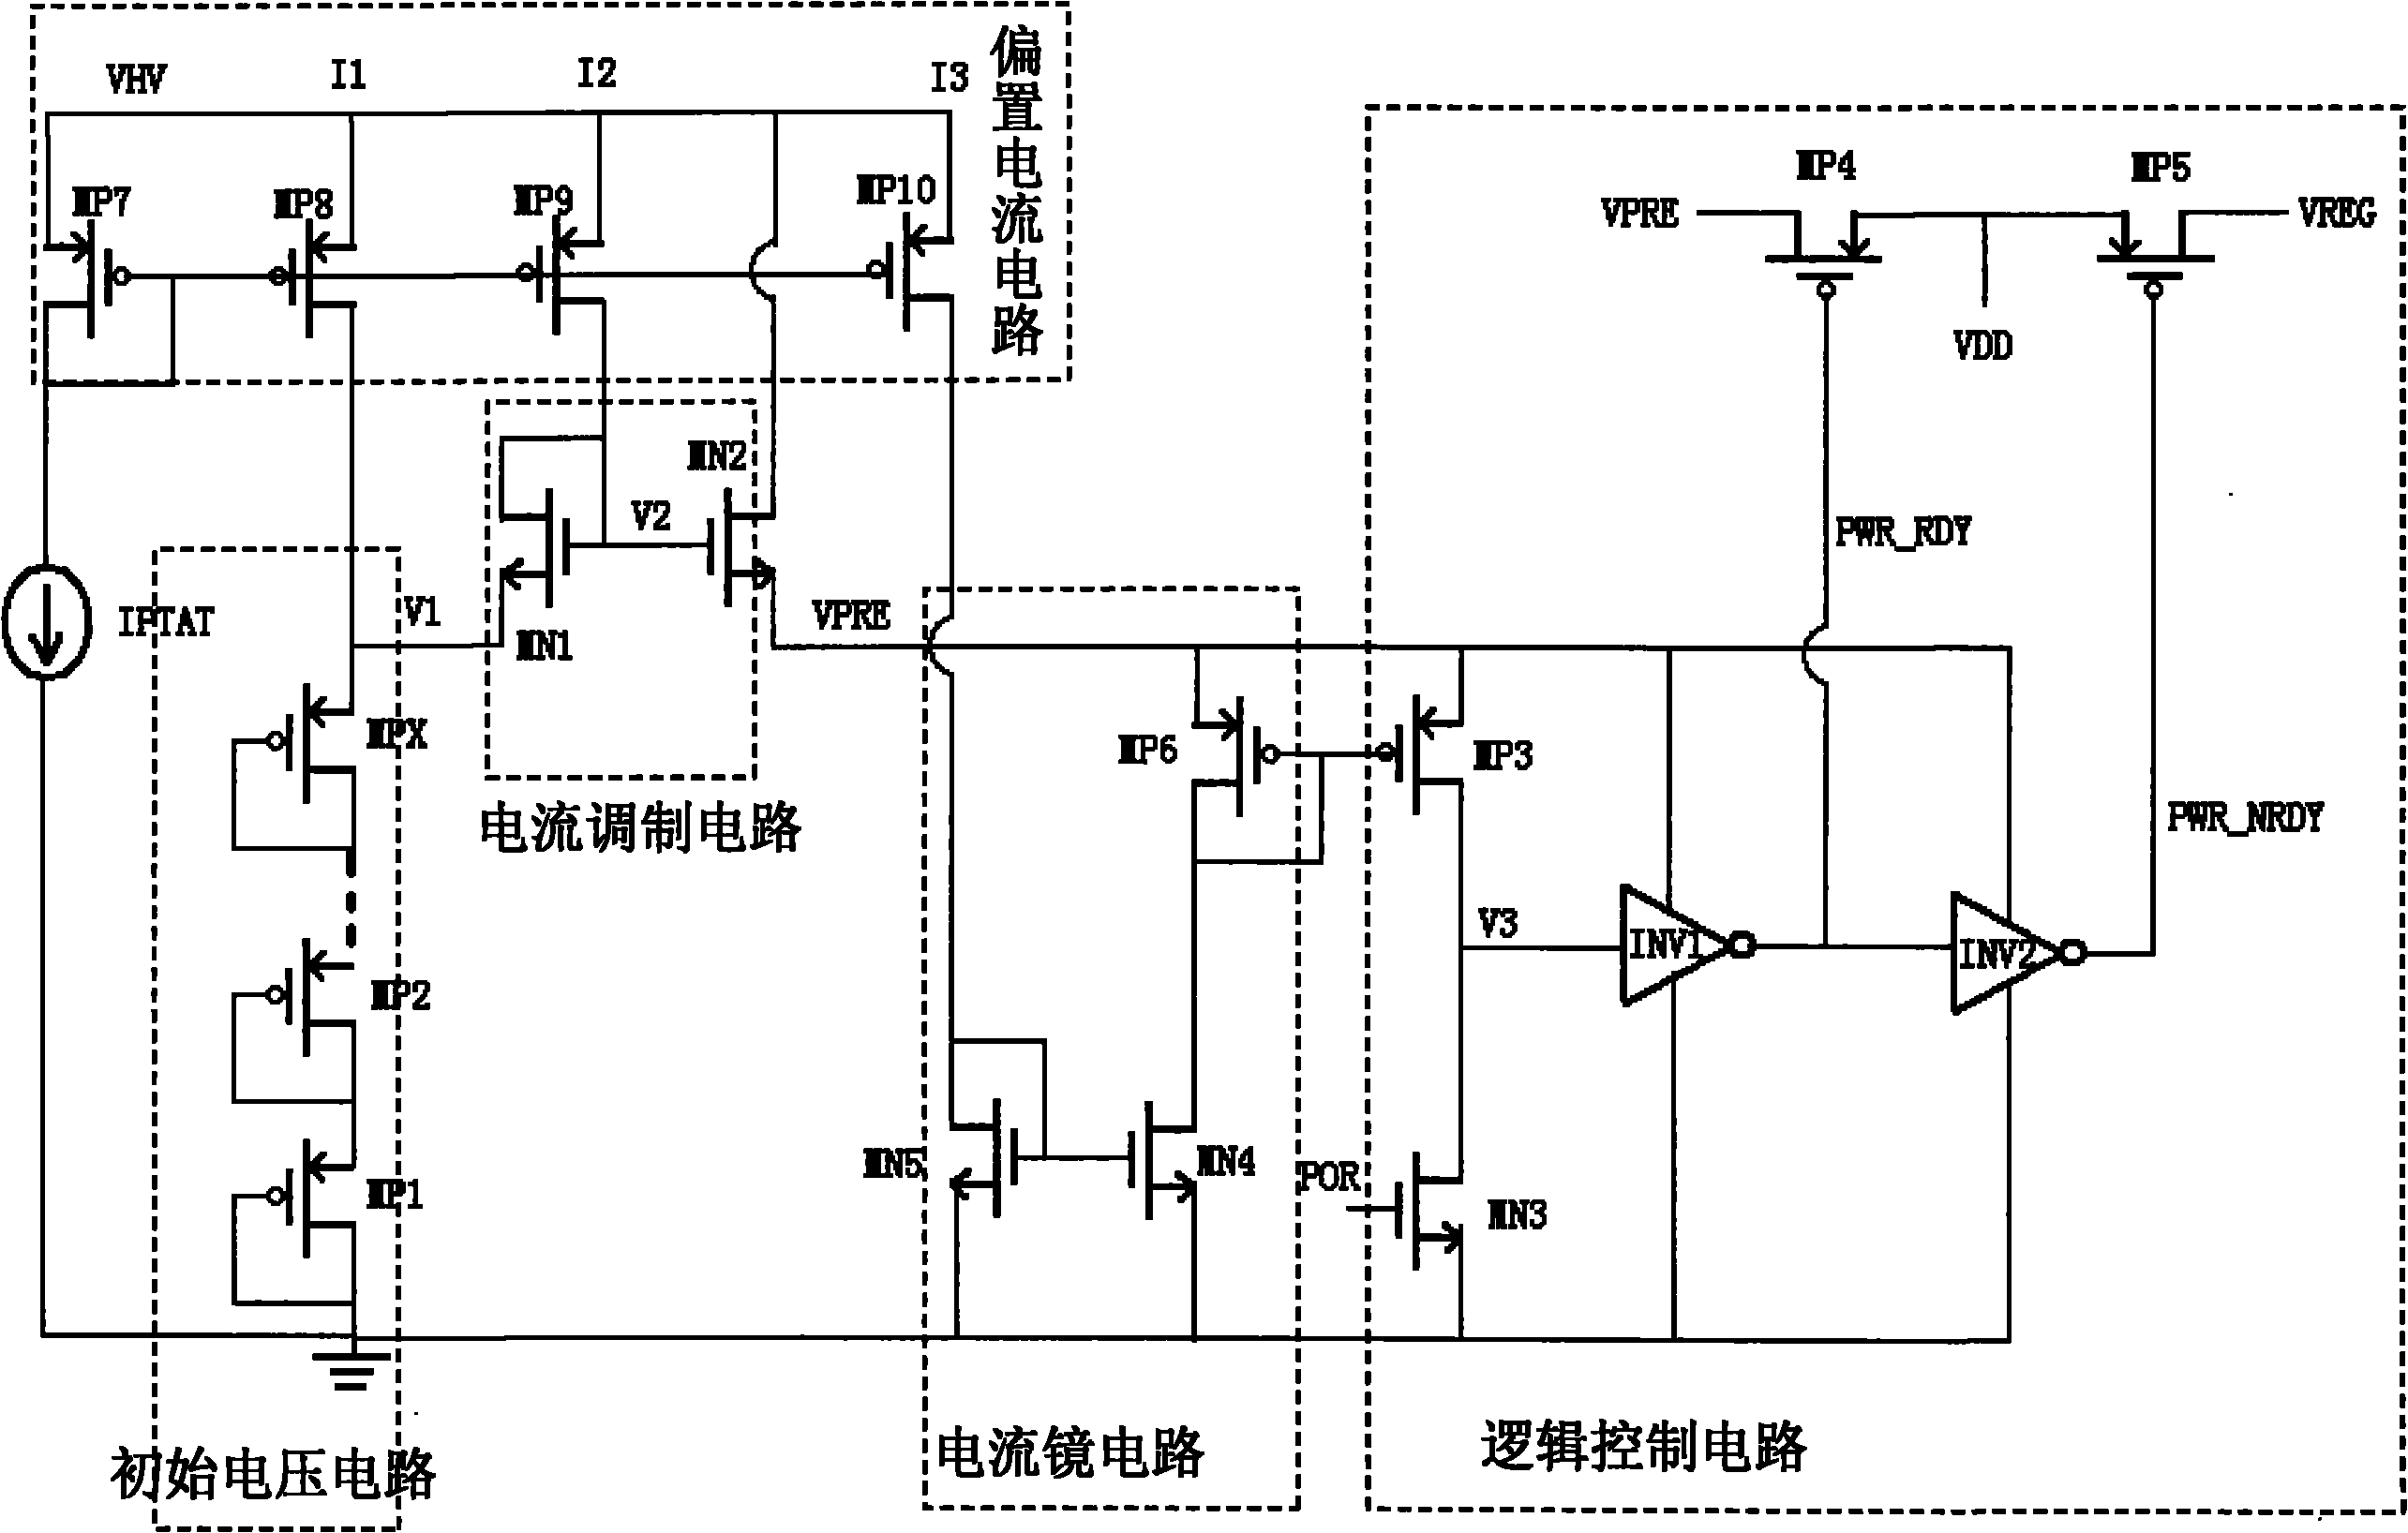 Quick starting power supply for power chip